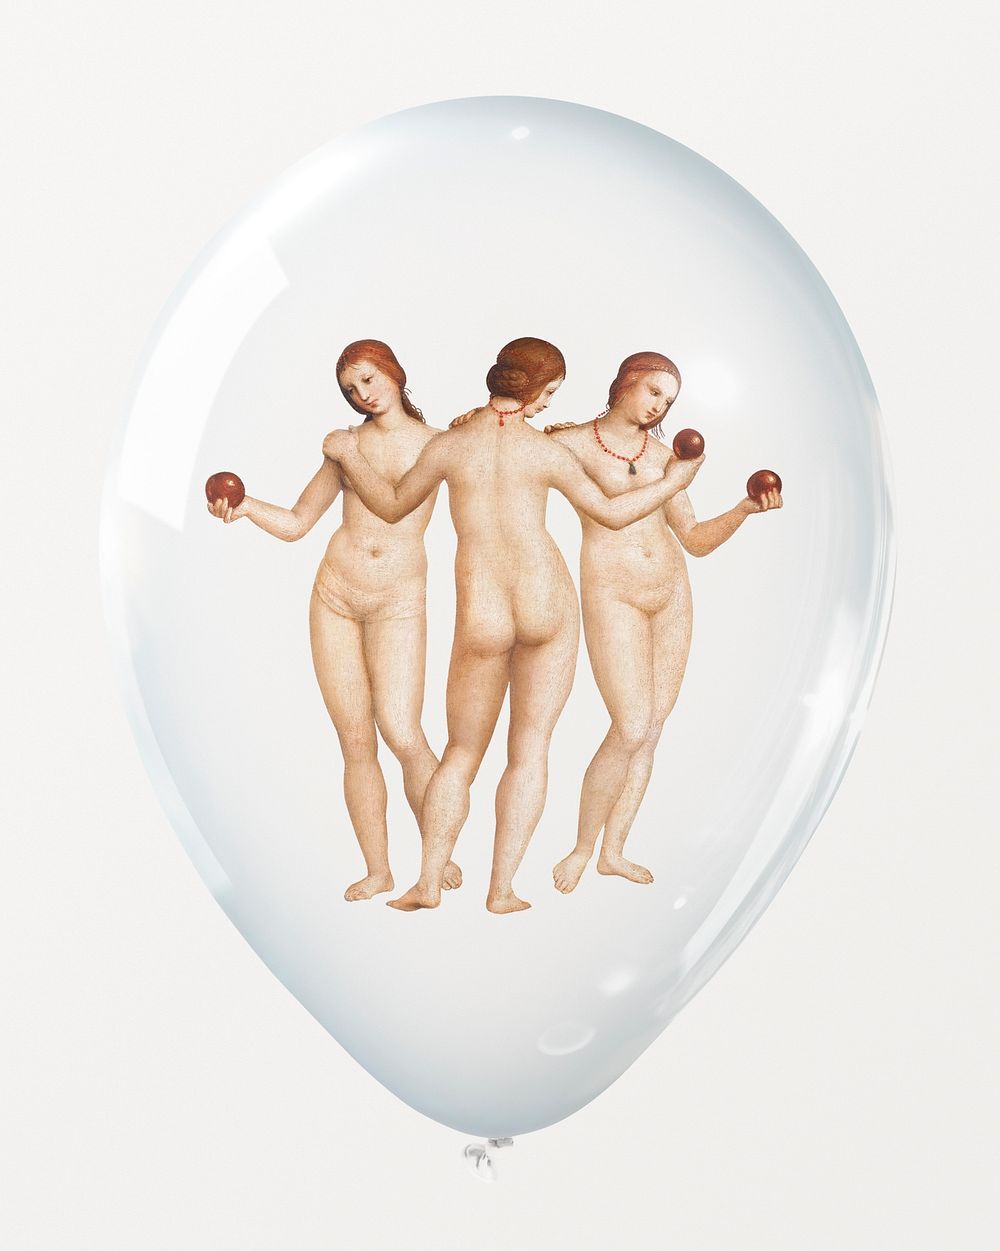 Three Graces in clear balloon, Antonio Canova's famous artwork remixed by rawpixel